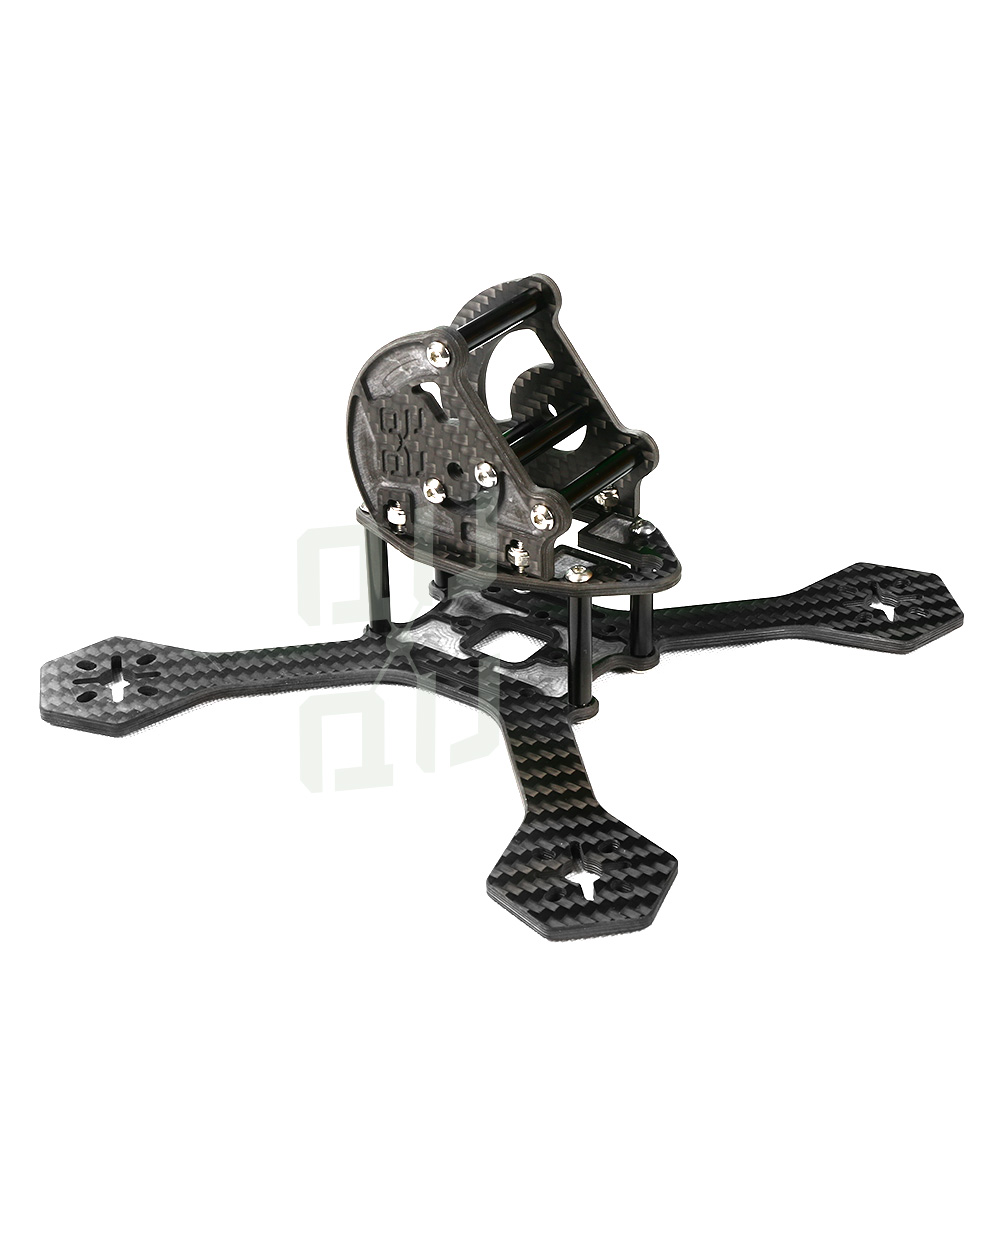 QQ166 4" Racing Drone X-style frame available from QuadQuestions.com left side view